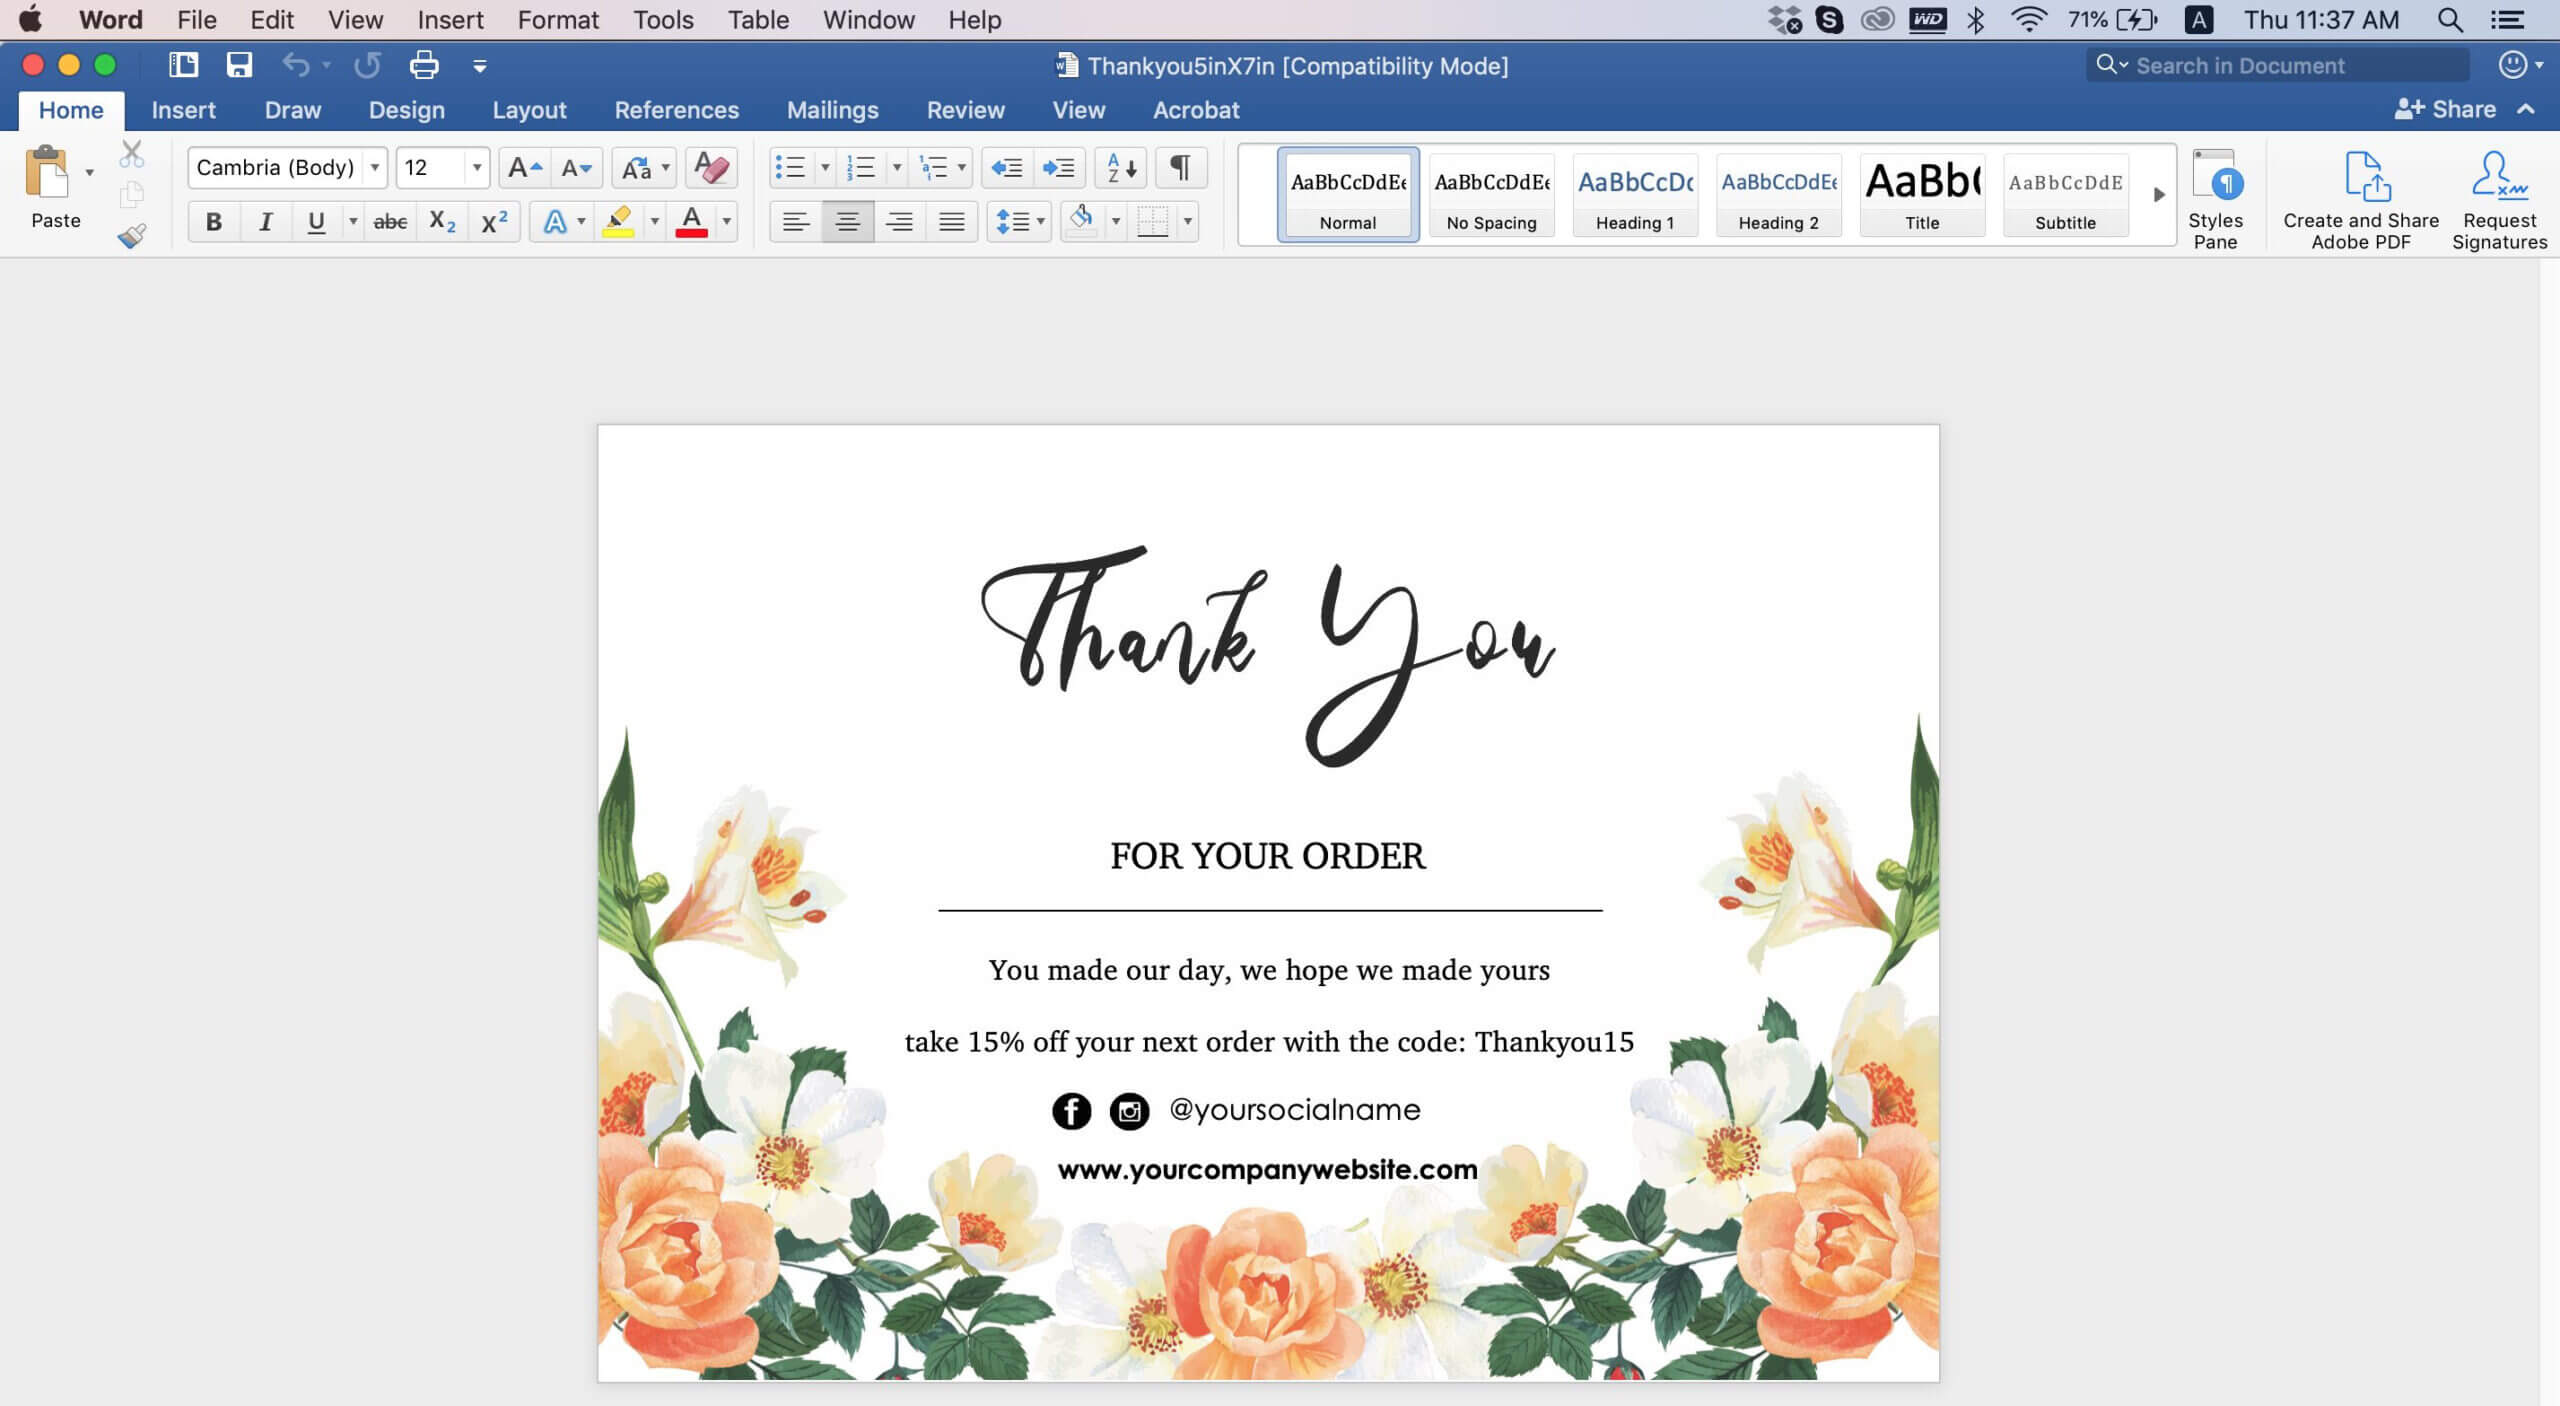 009 Editable Thank You Post Card Template Word Top Ideas In Thank You Card Template Word